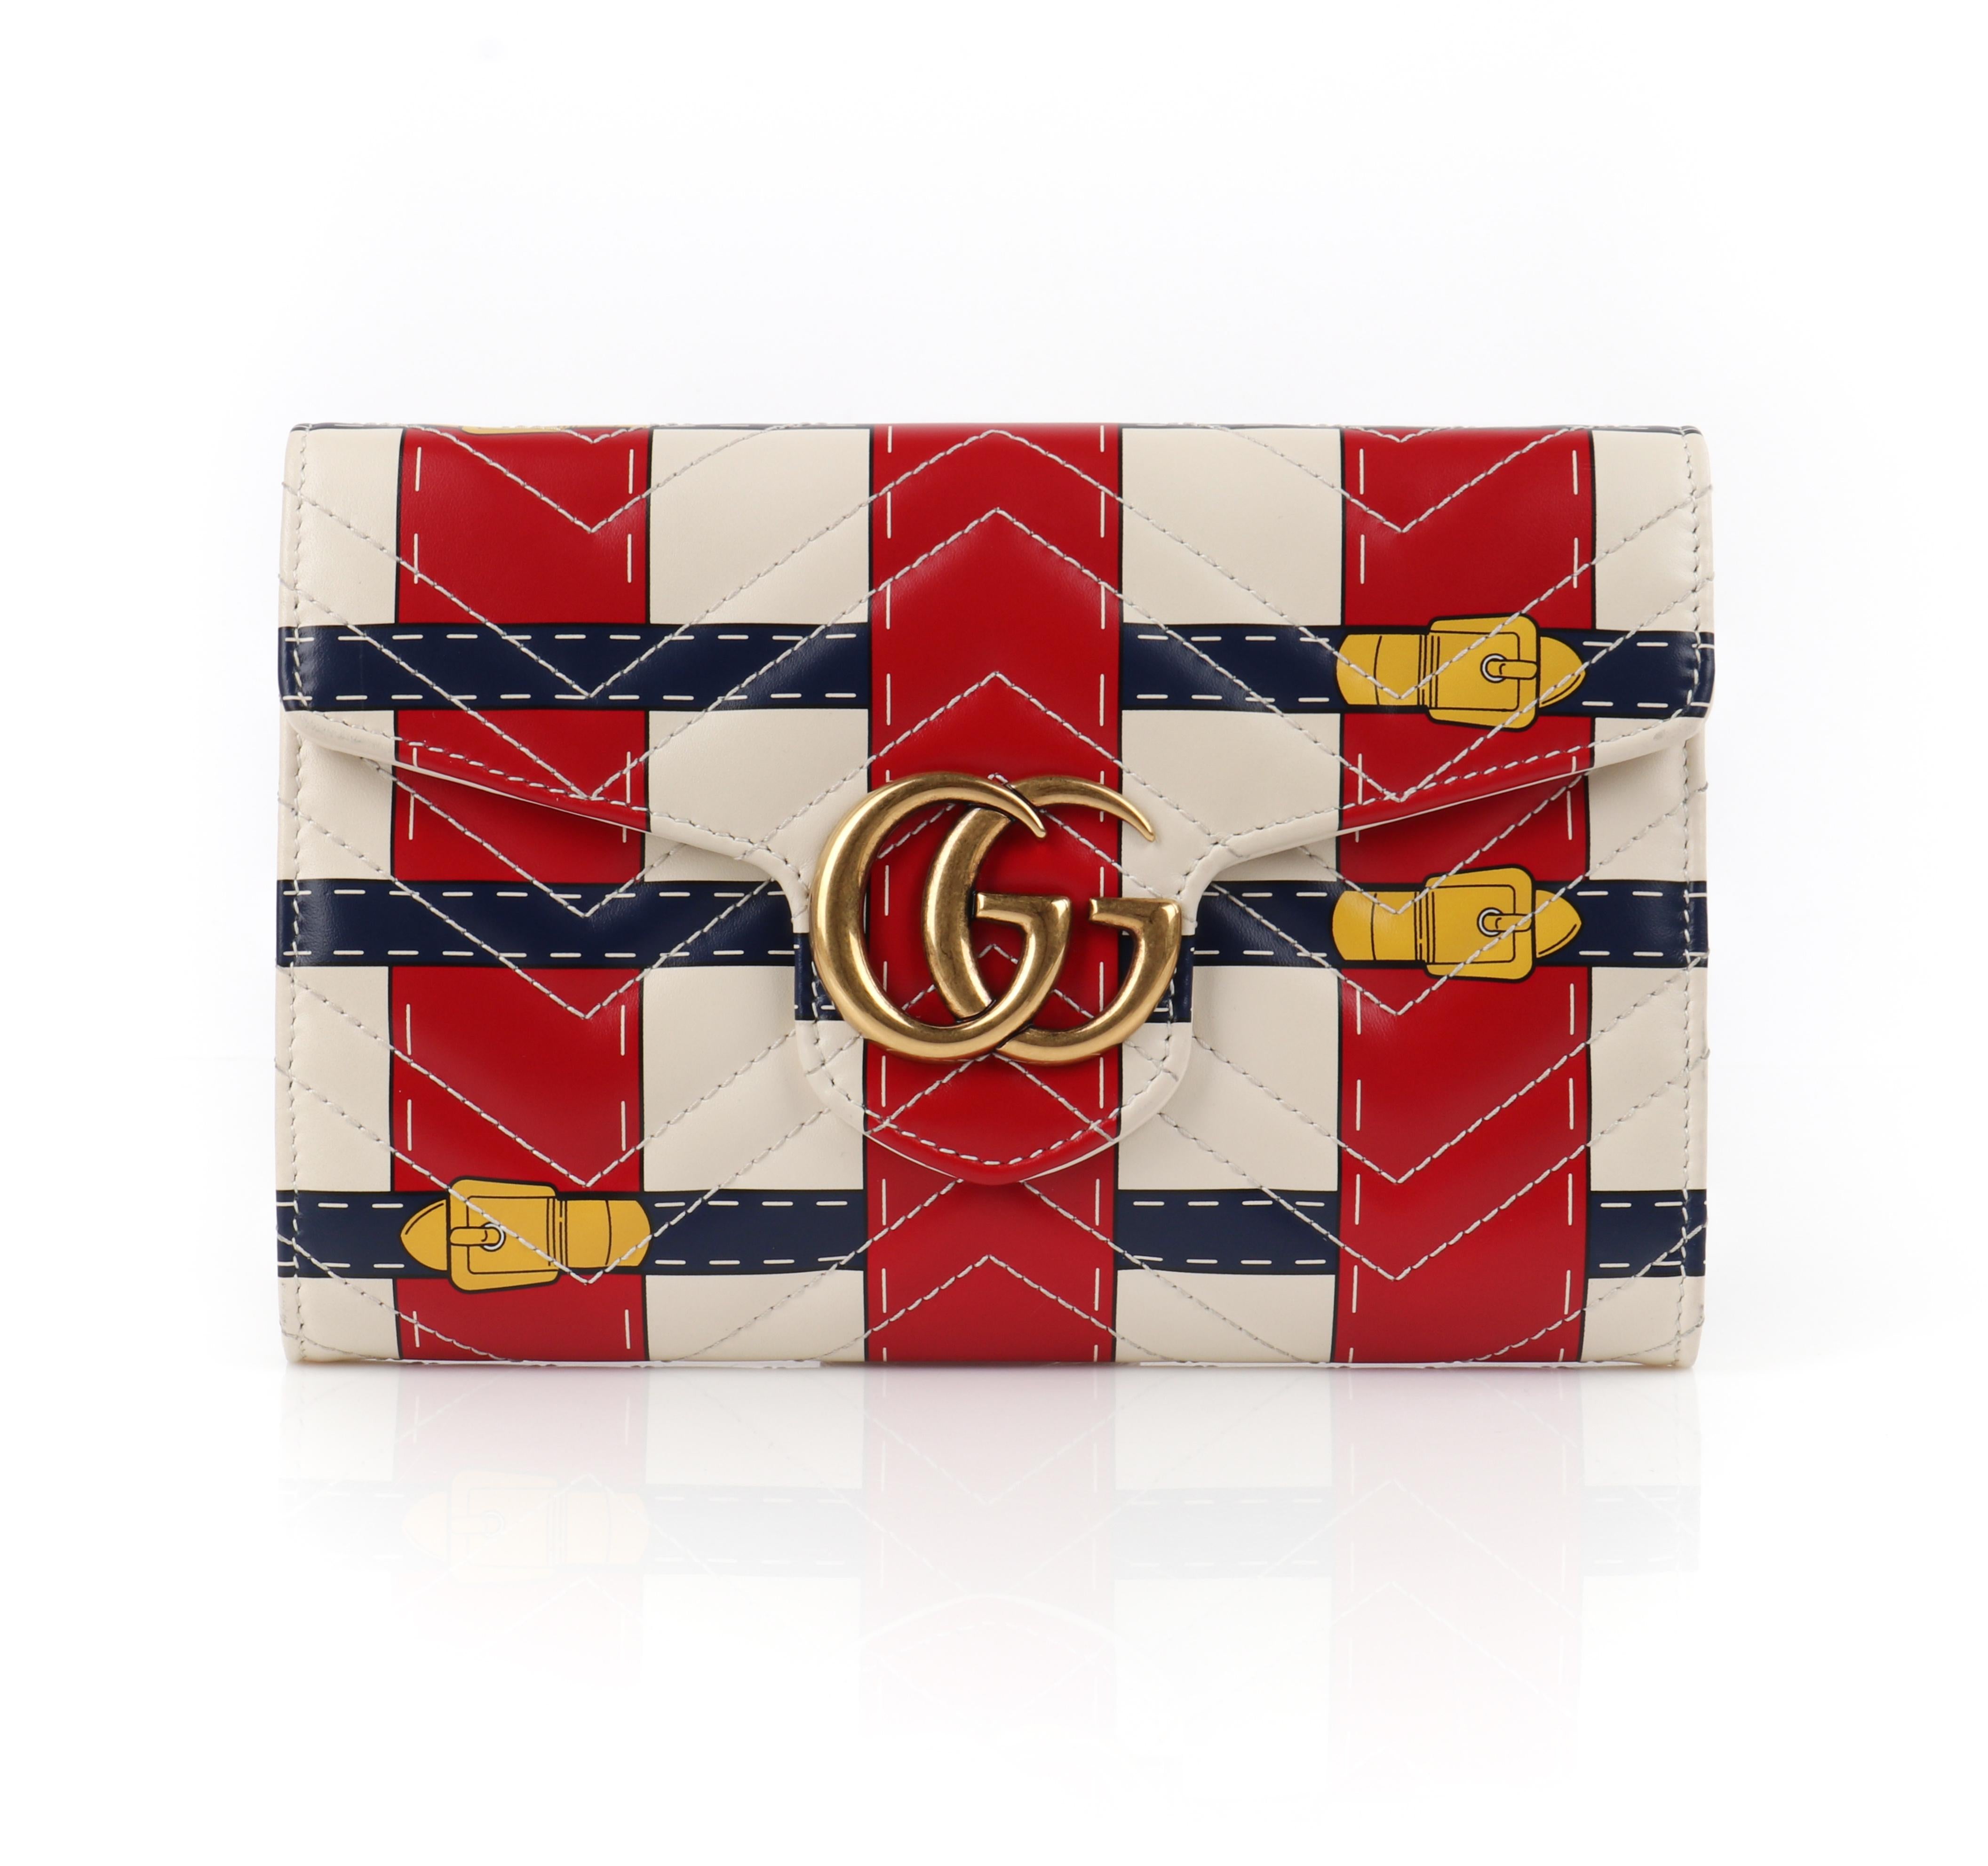 GUCCI GG Marmont 2017 Trompe L'oeil Calfskin Leather Crossbody Chain Wallet Bag
  
Brand / Manufacturer: Gucci
Style: Chain wallet
Color(s): Red, off-white, blue, yellow (exterior, pockets); shades of gold (hardware); nude (interior)
Lined: